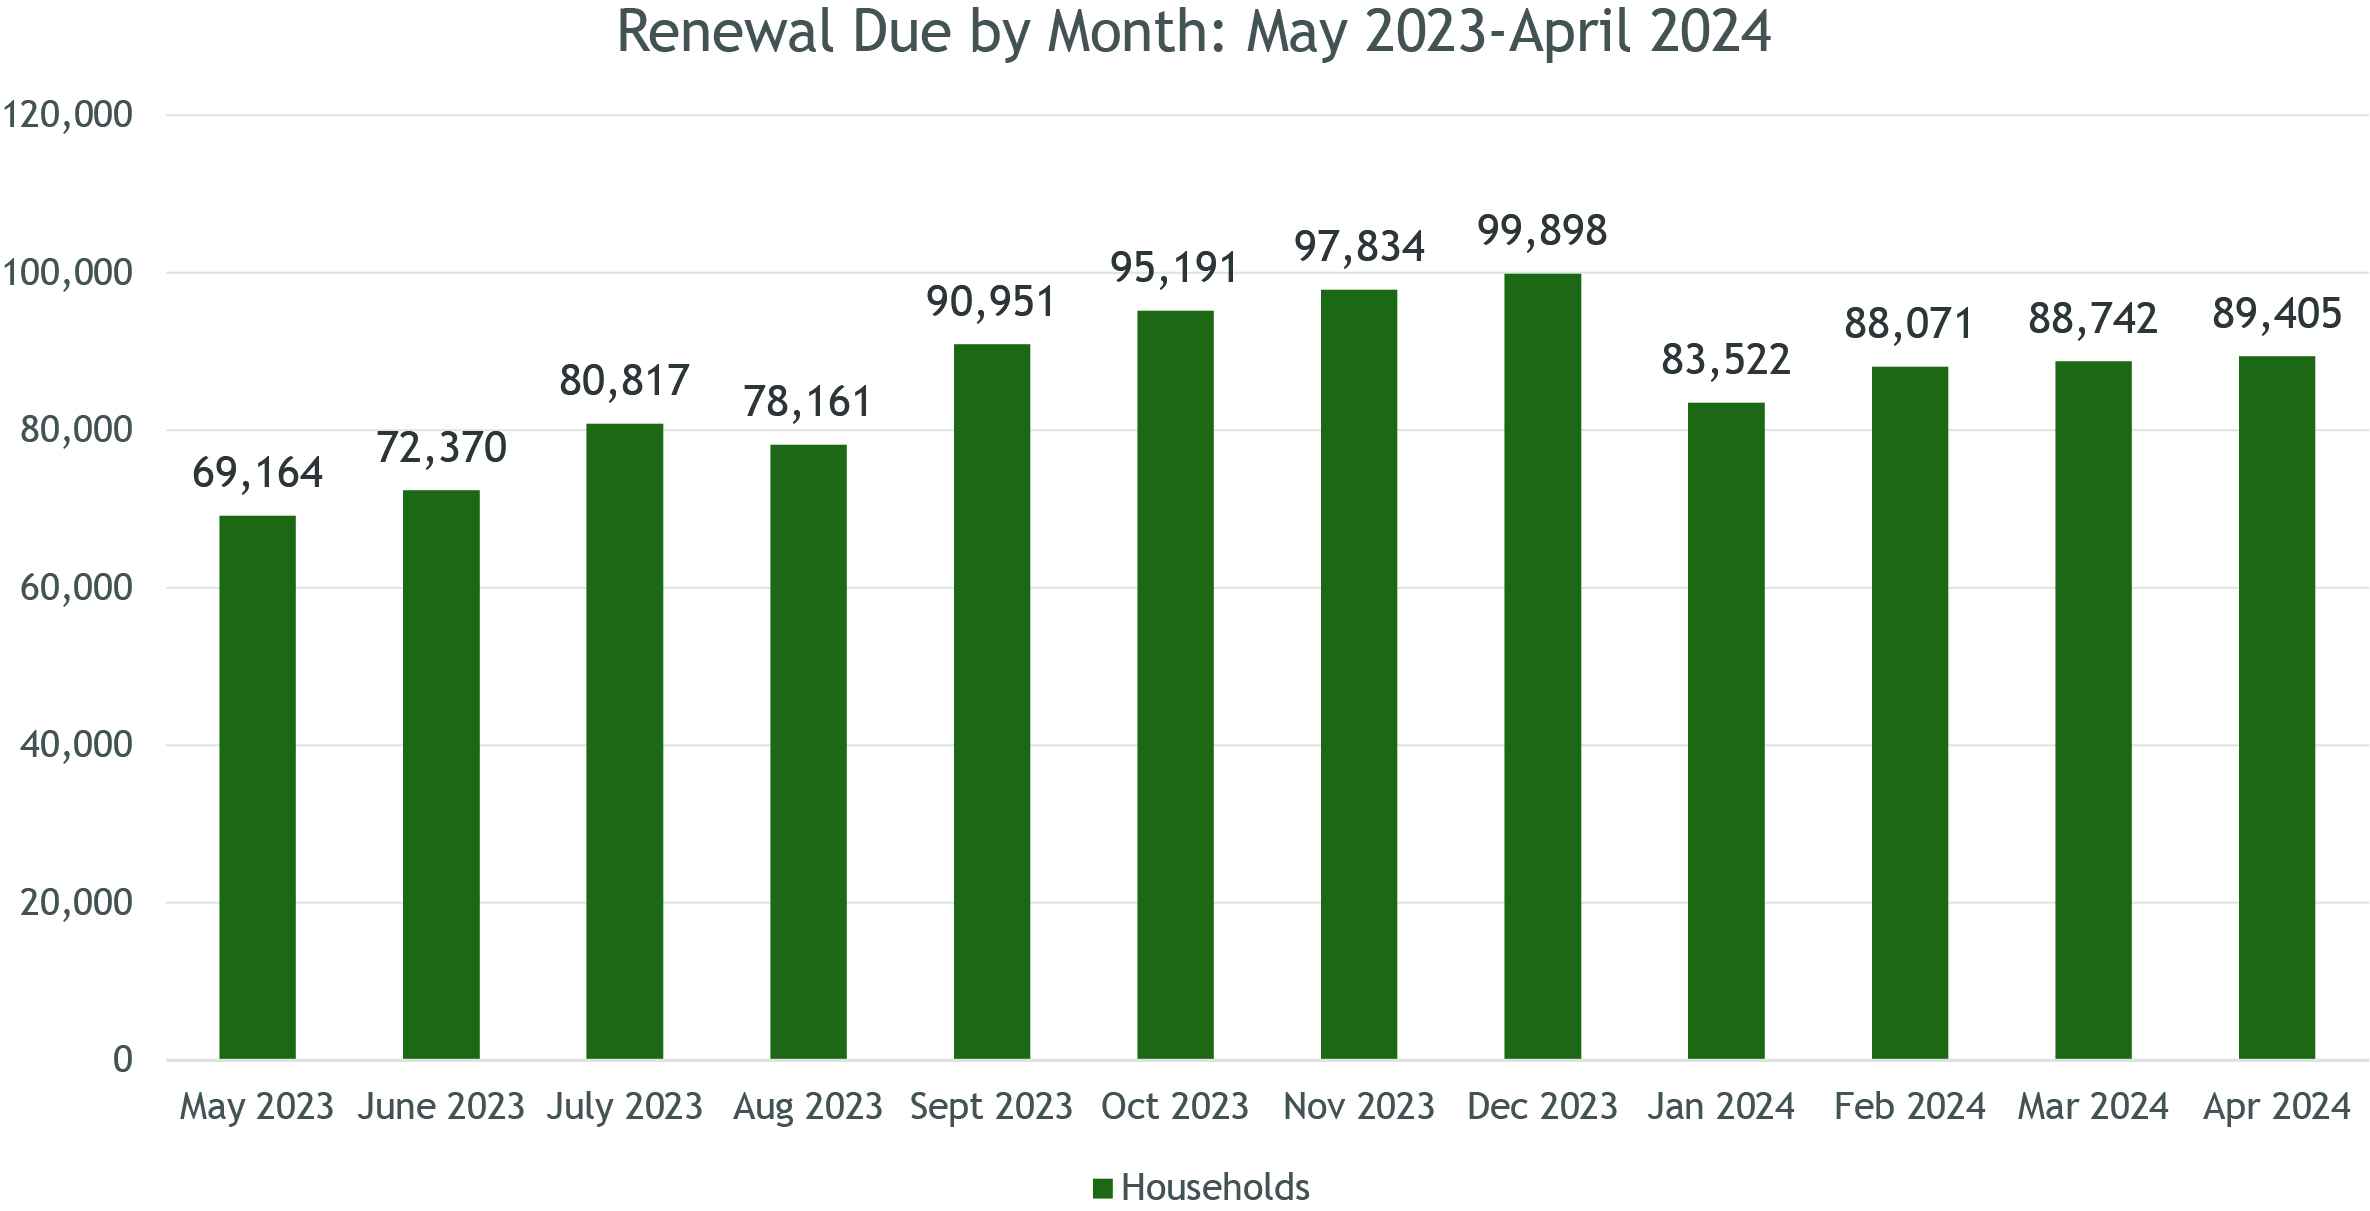 Bar chart displaying renewals due by month from May 2023 through April 2024 showing Sept through December of 2023 with the highest ranging from 90,951 to 99,898 households and May 2023 with the lowest at 69,164 households.